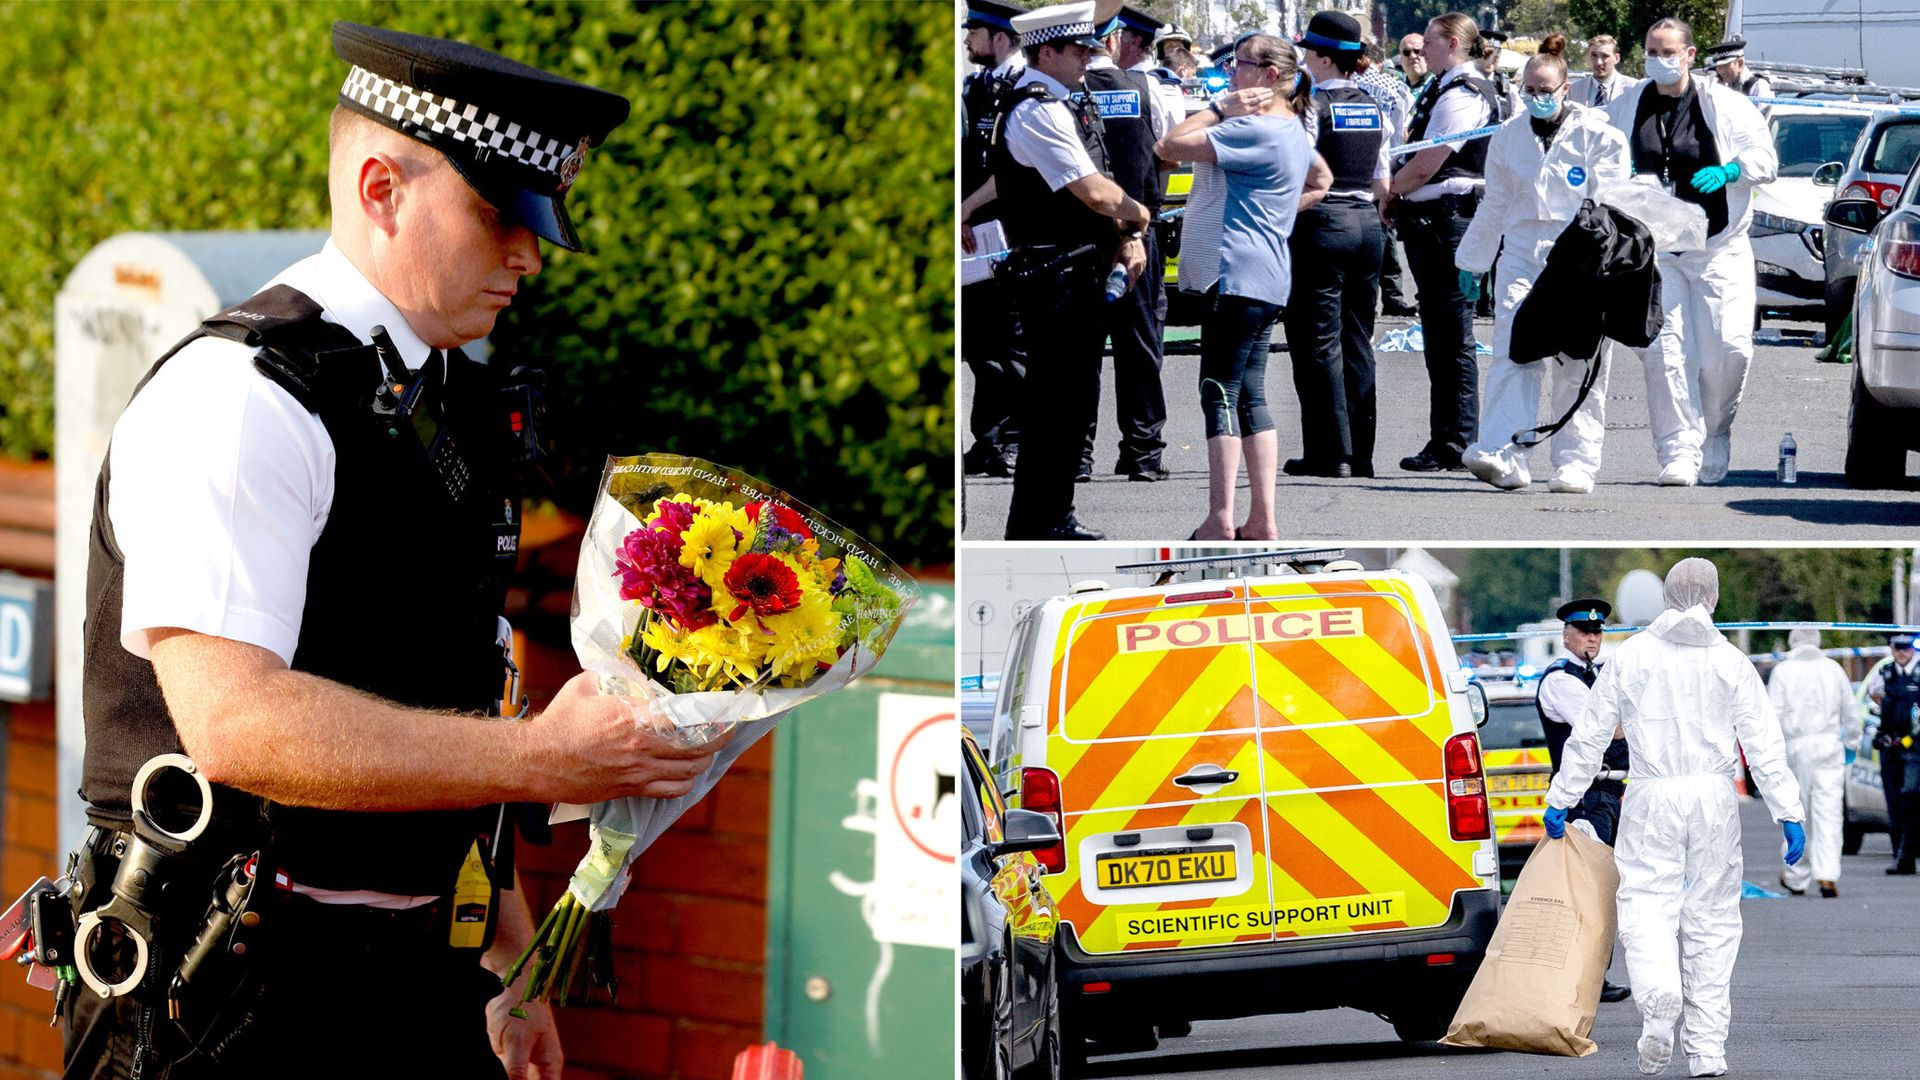 Nine-year-old girl becomes third child to die after Southport stabbings